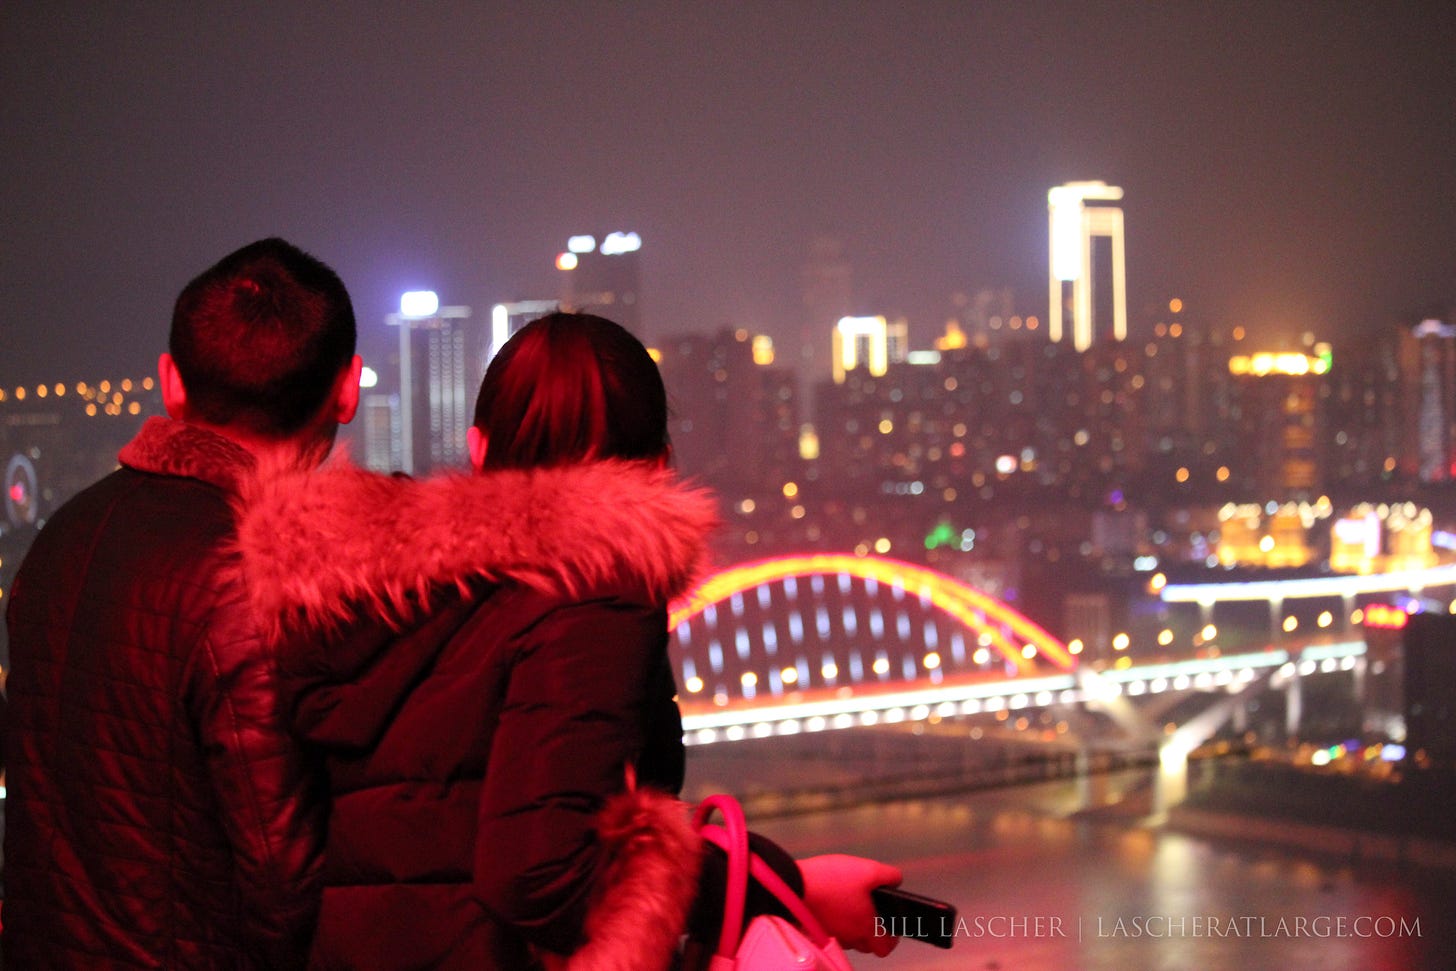 A couple with their backs to the camera look over a brightly-lit urban skyline and an arc-shaped bridge illuminated with glowing lights crossing a river in the lower third of the photo. It is nighttime and many of the buildings have lines of bright lights around their edges. The couple's fur lined coats have a red tint cast by lights behind the photographer.